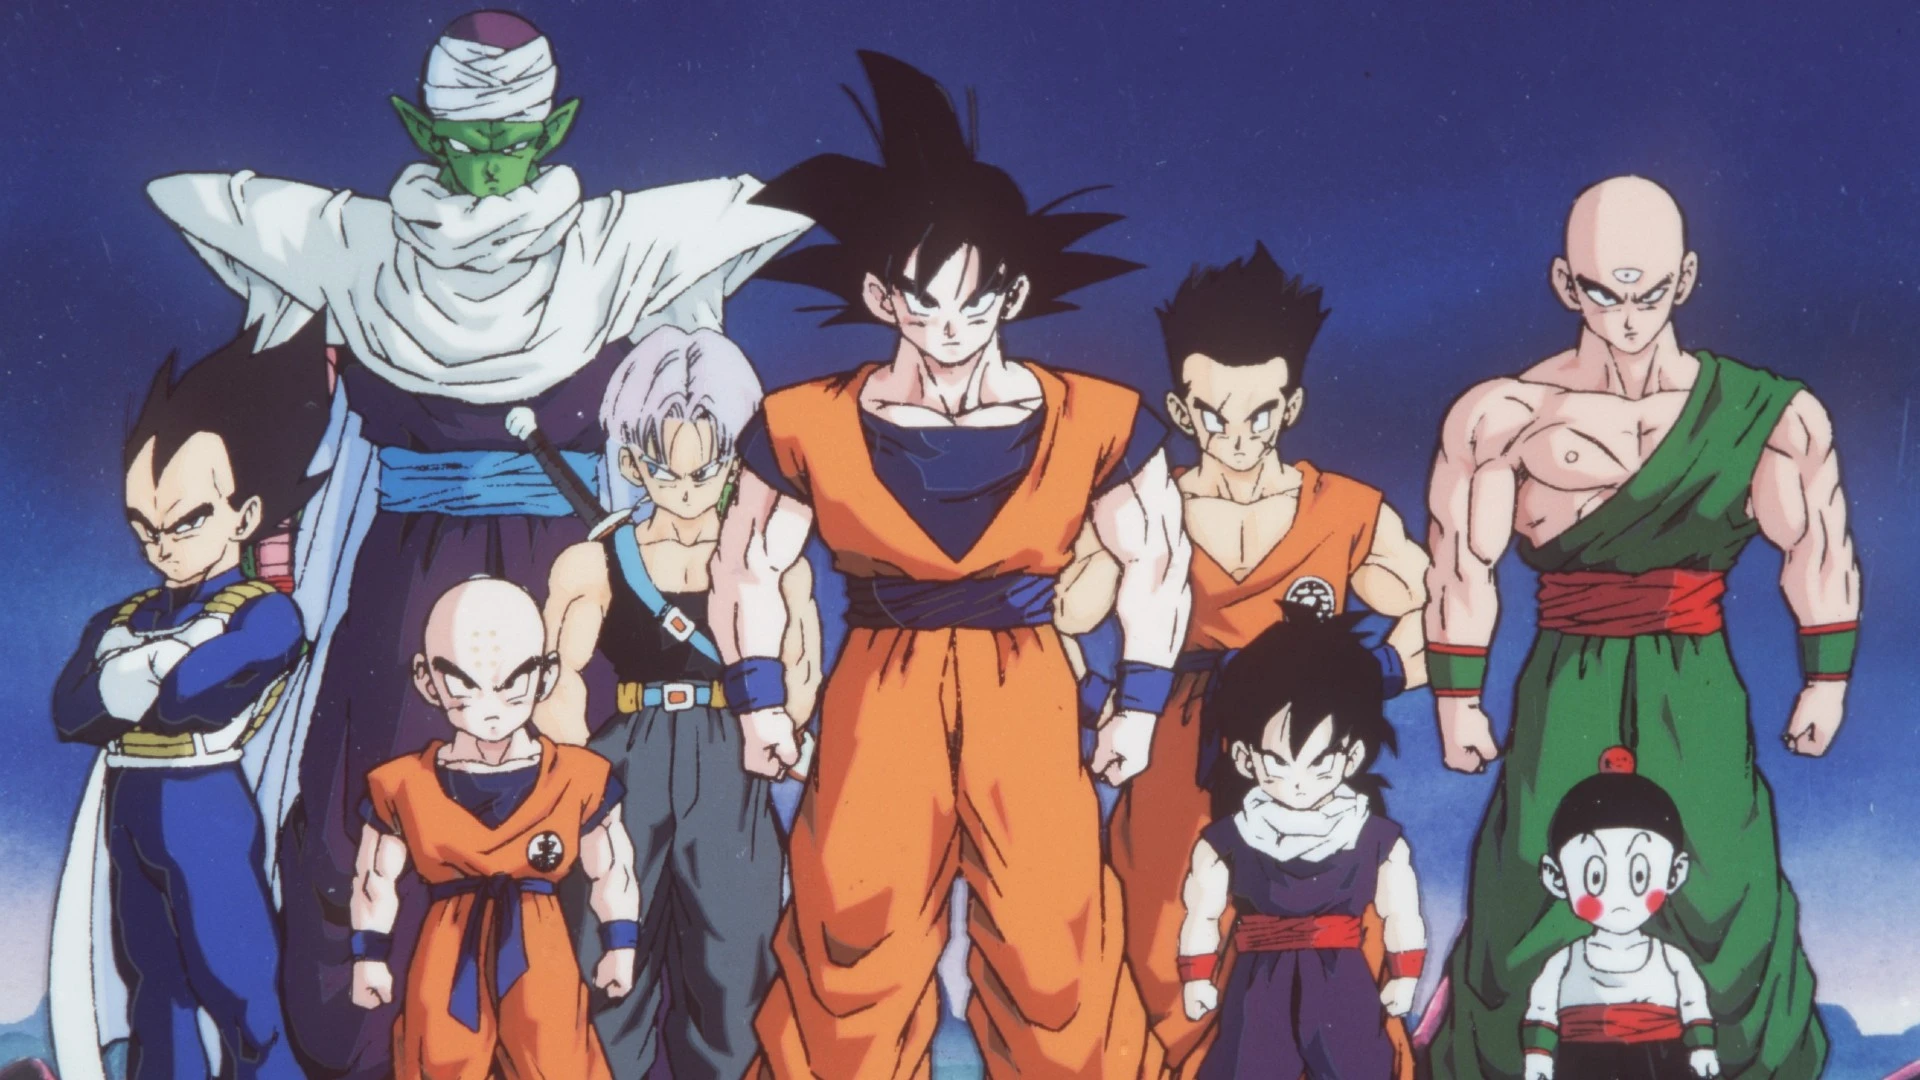 The very first Anime we were introduced to as a kid was Dragon Ball Z